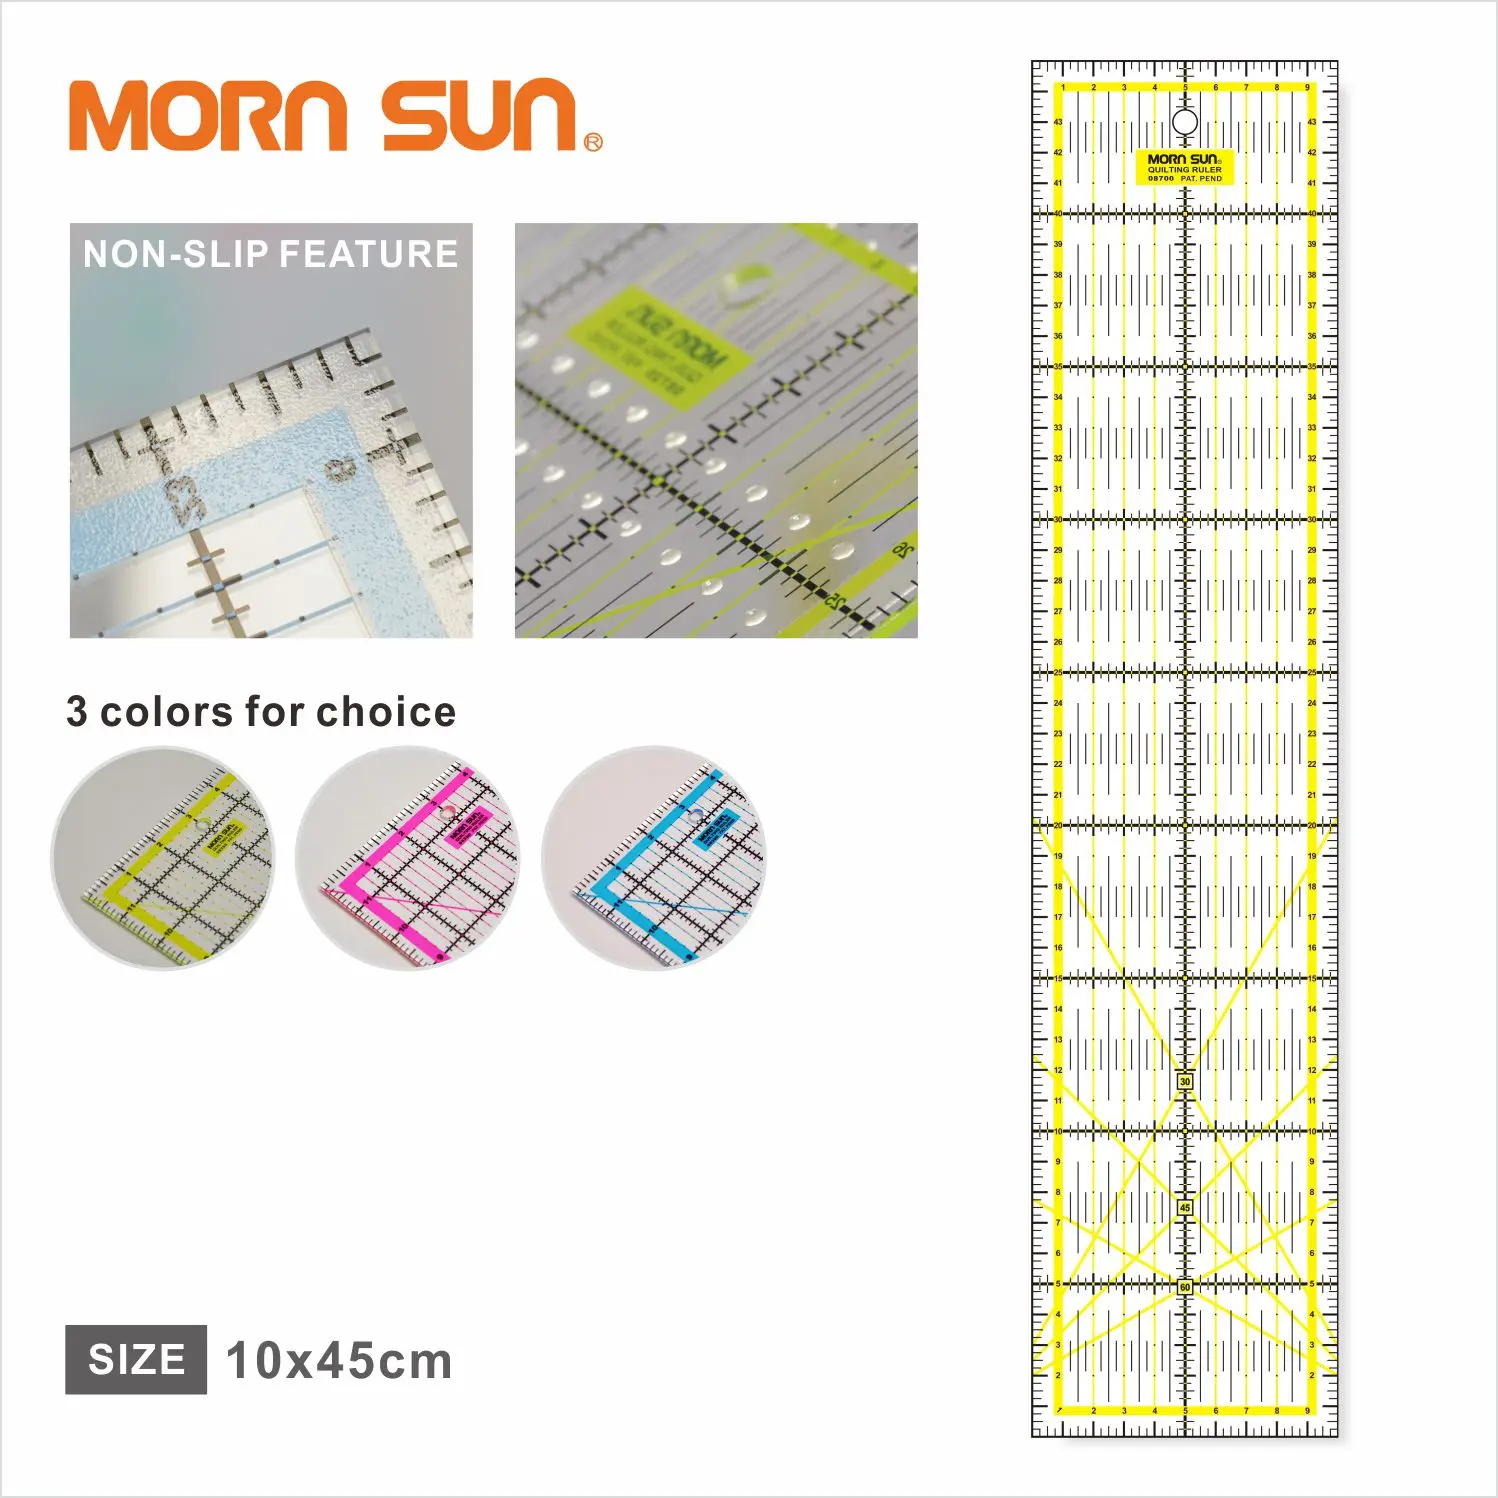 Taiwan stable supply scale sewing rectangular 45x10cm sewing non-slip quilting ruler scale for home sewing